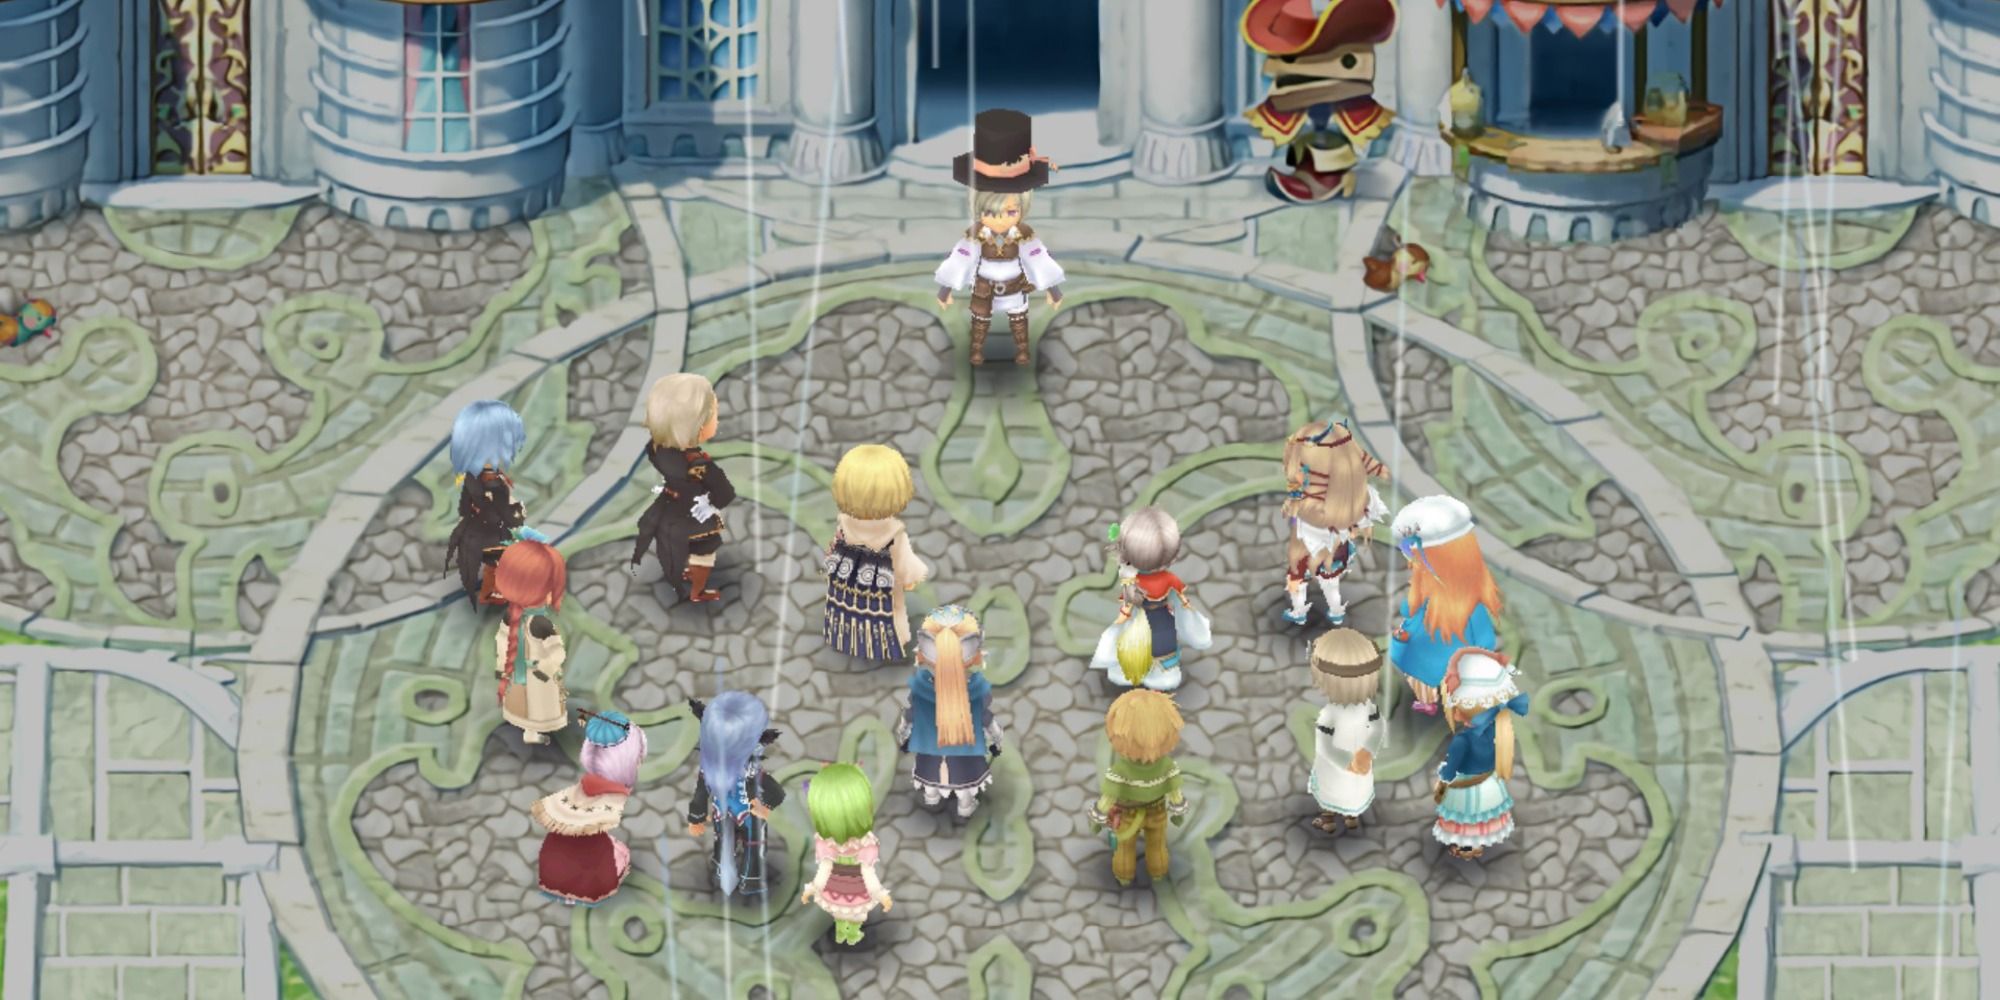 The player surrounded by the residents of Selphia in Rune Factory 4 Special